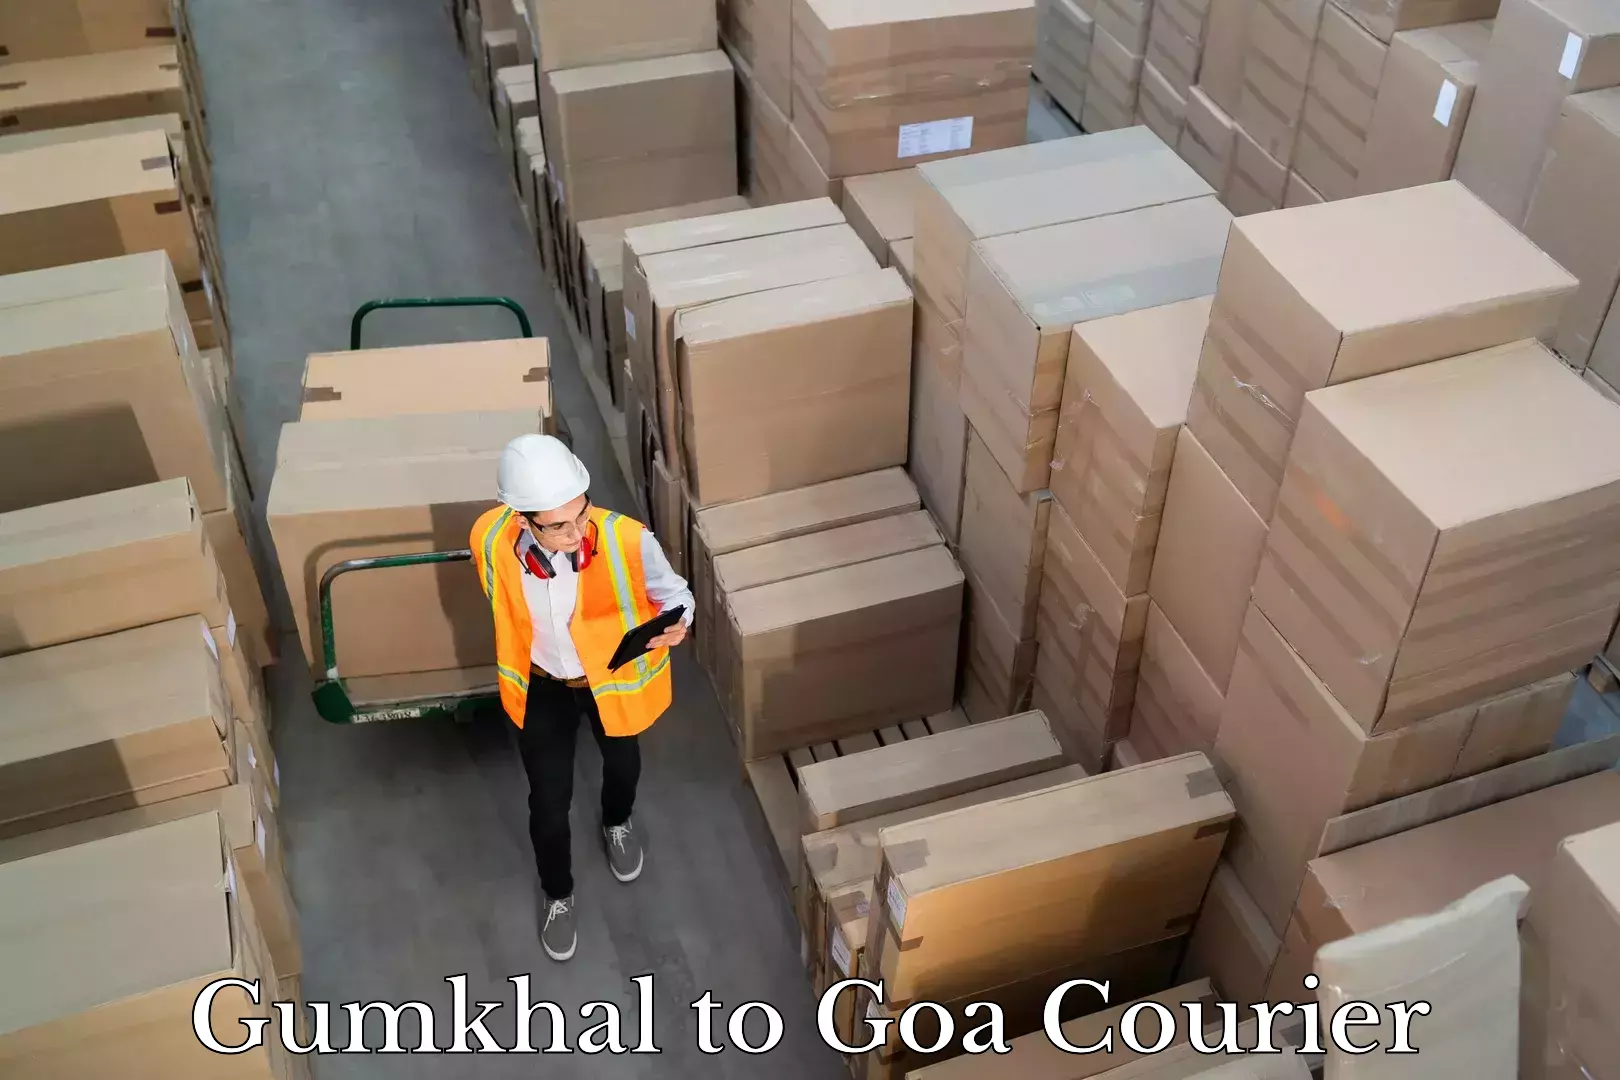 Next-day delivery options Gumkhal to Goa